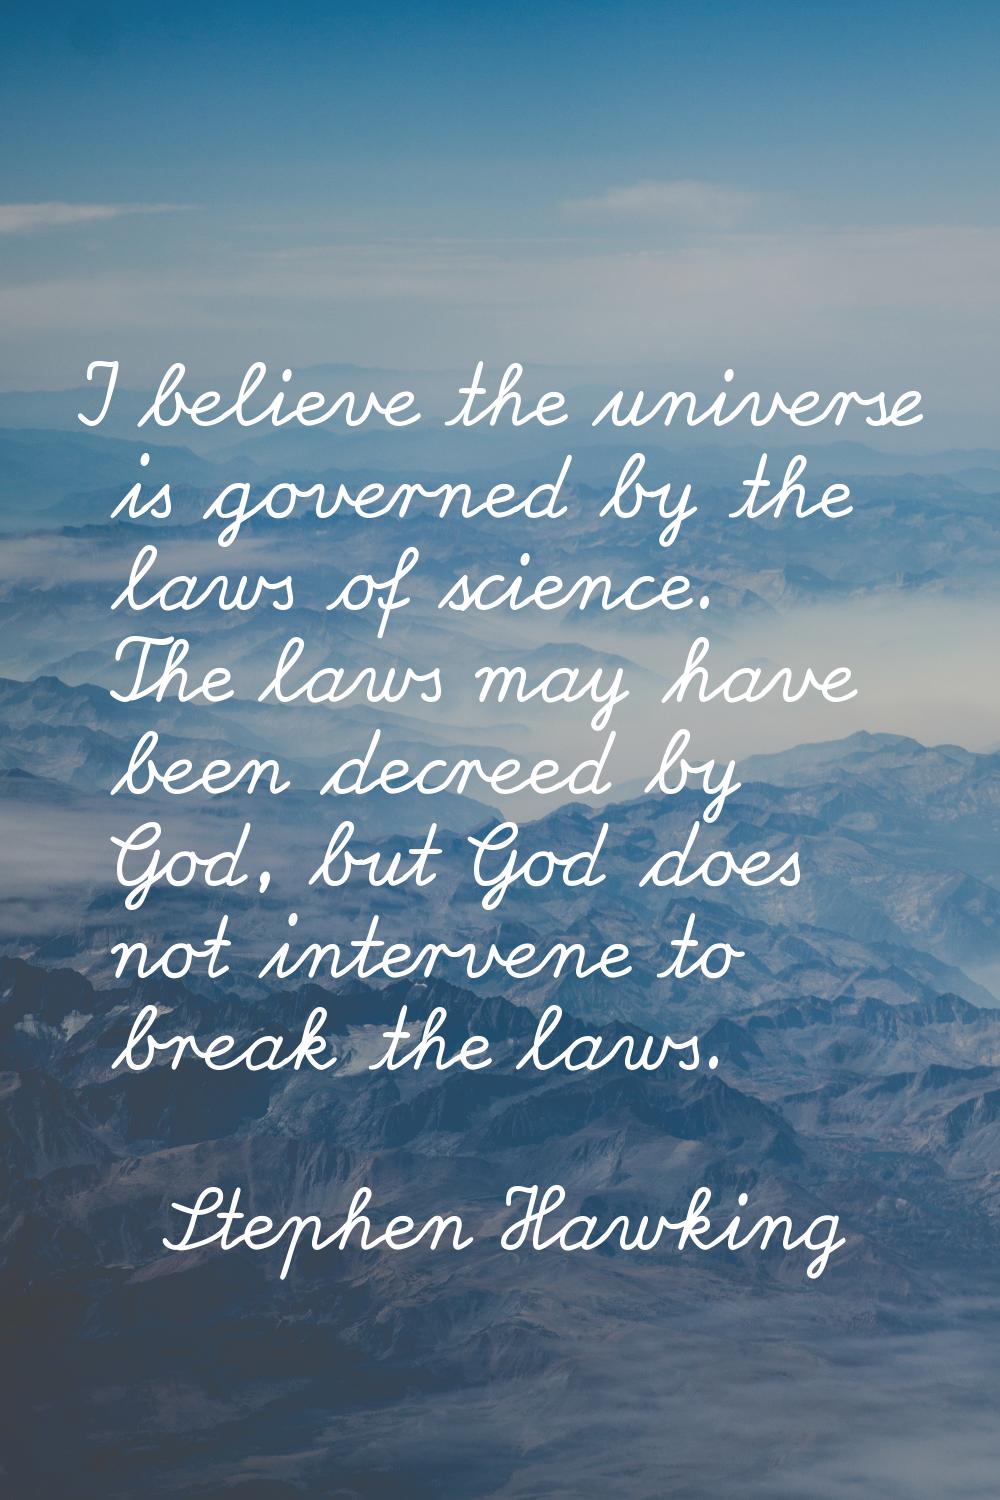 I believe the universe is governed by the laws of science. The laws may have been decreed by God, b